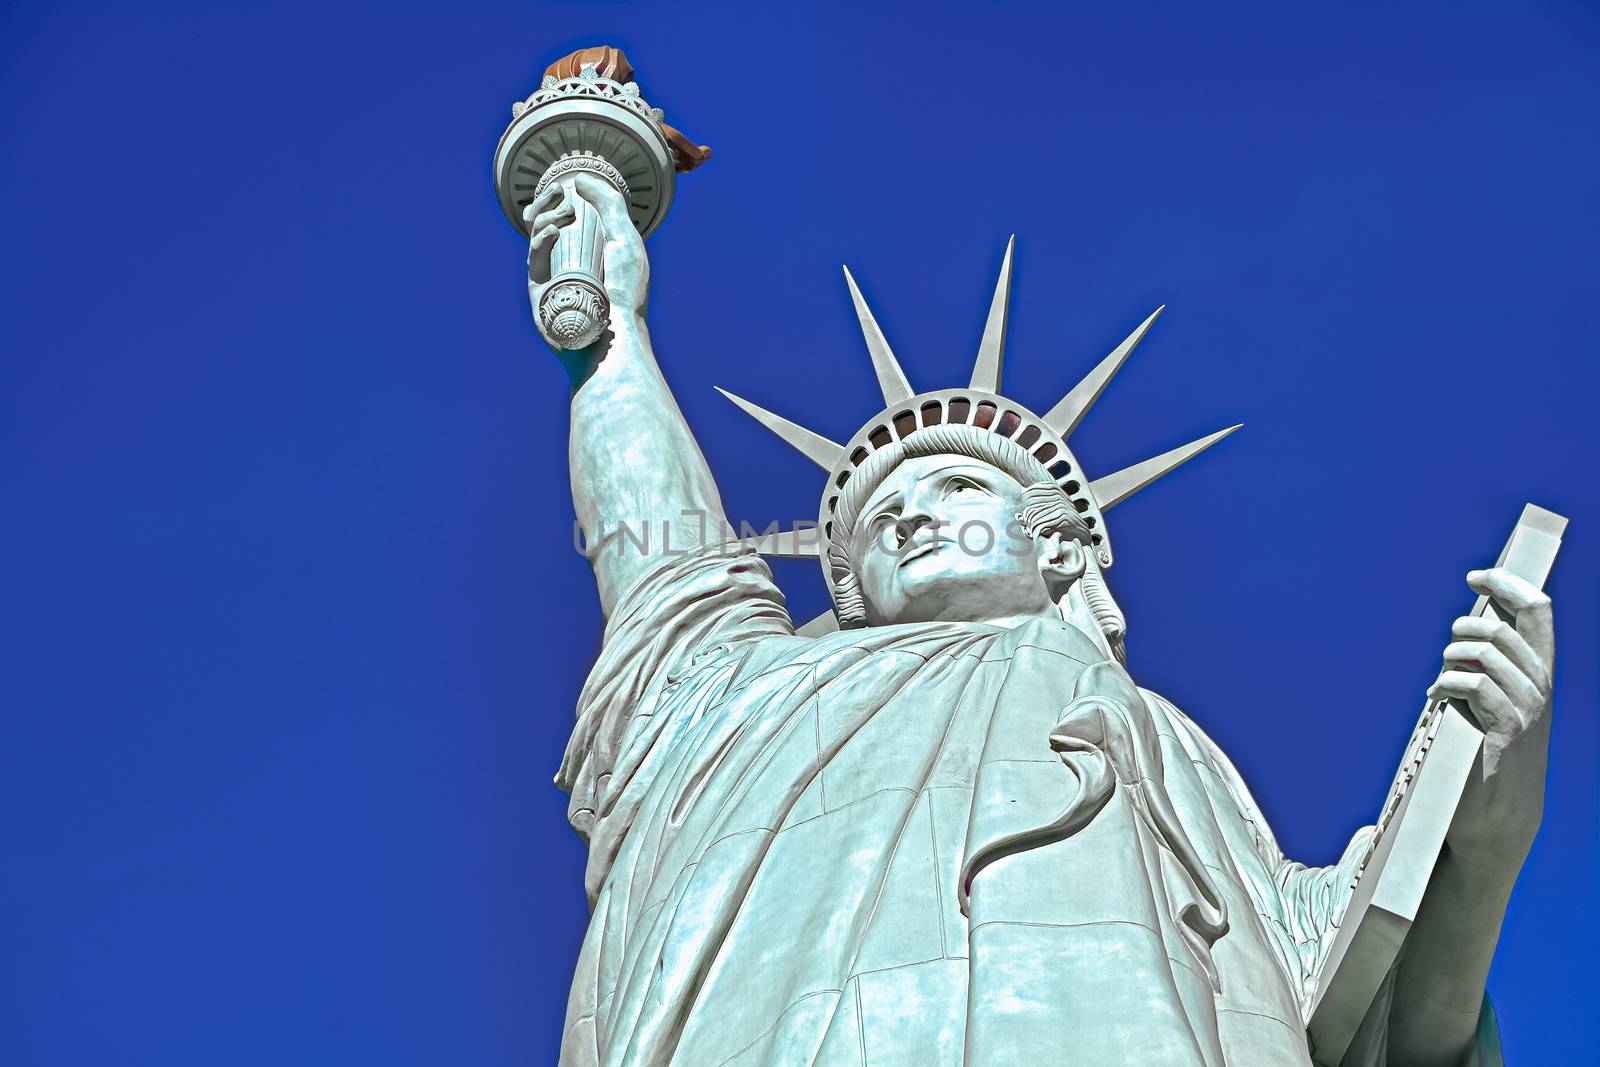 The Statue of Liberty is a colossal copper statue designed by Auguste Bartholdi a French sculptor was built by Gustave Eiffel.Dedicated on Oct 28, 1886.One of most famous icons of the 4th of July USA. by USA-TARO